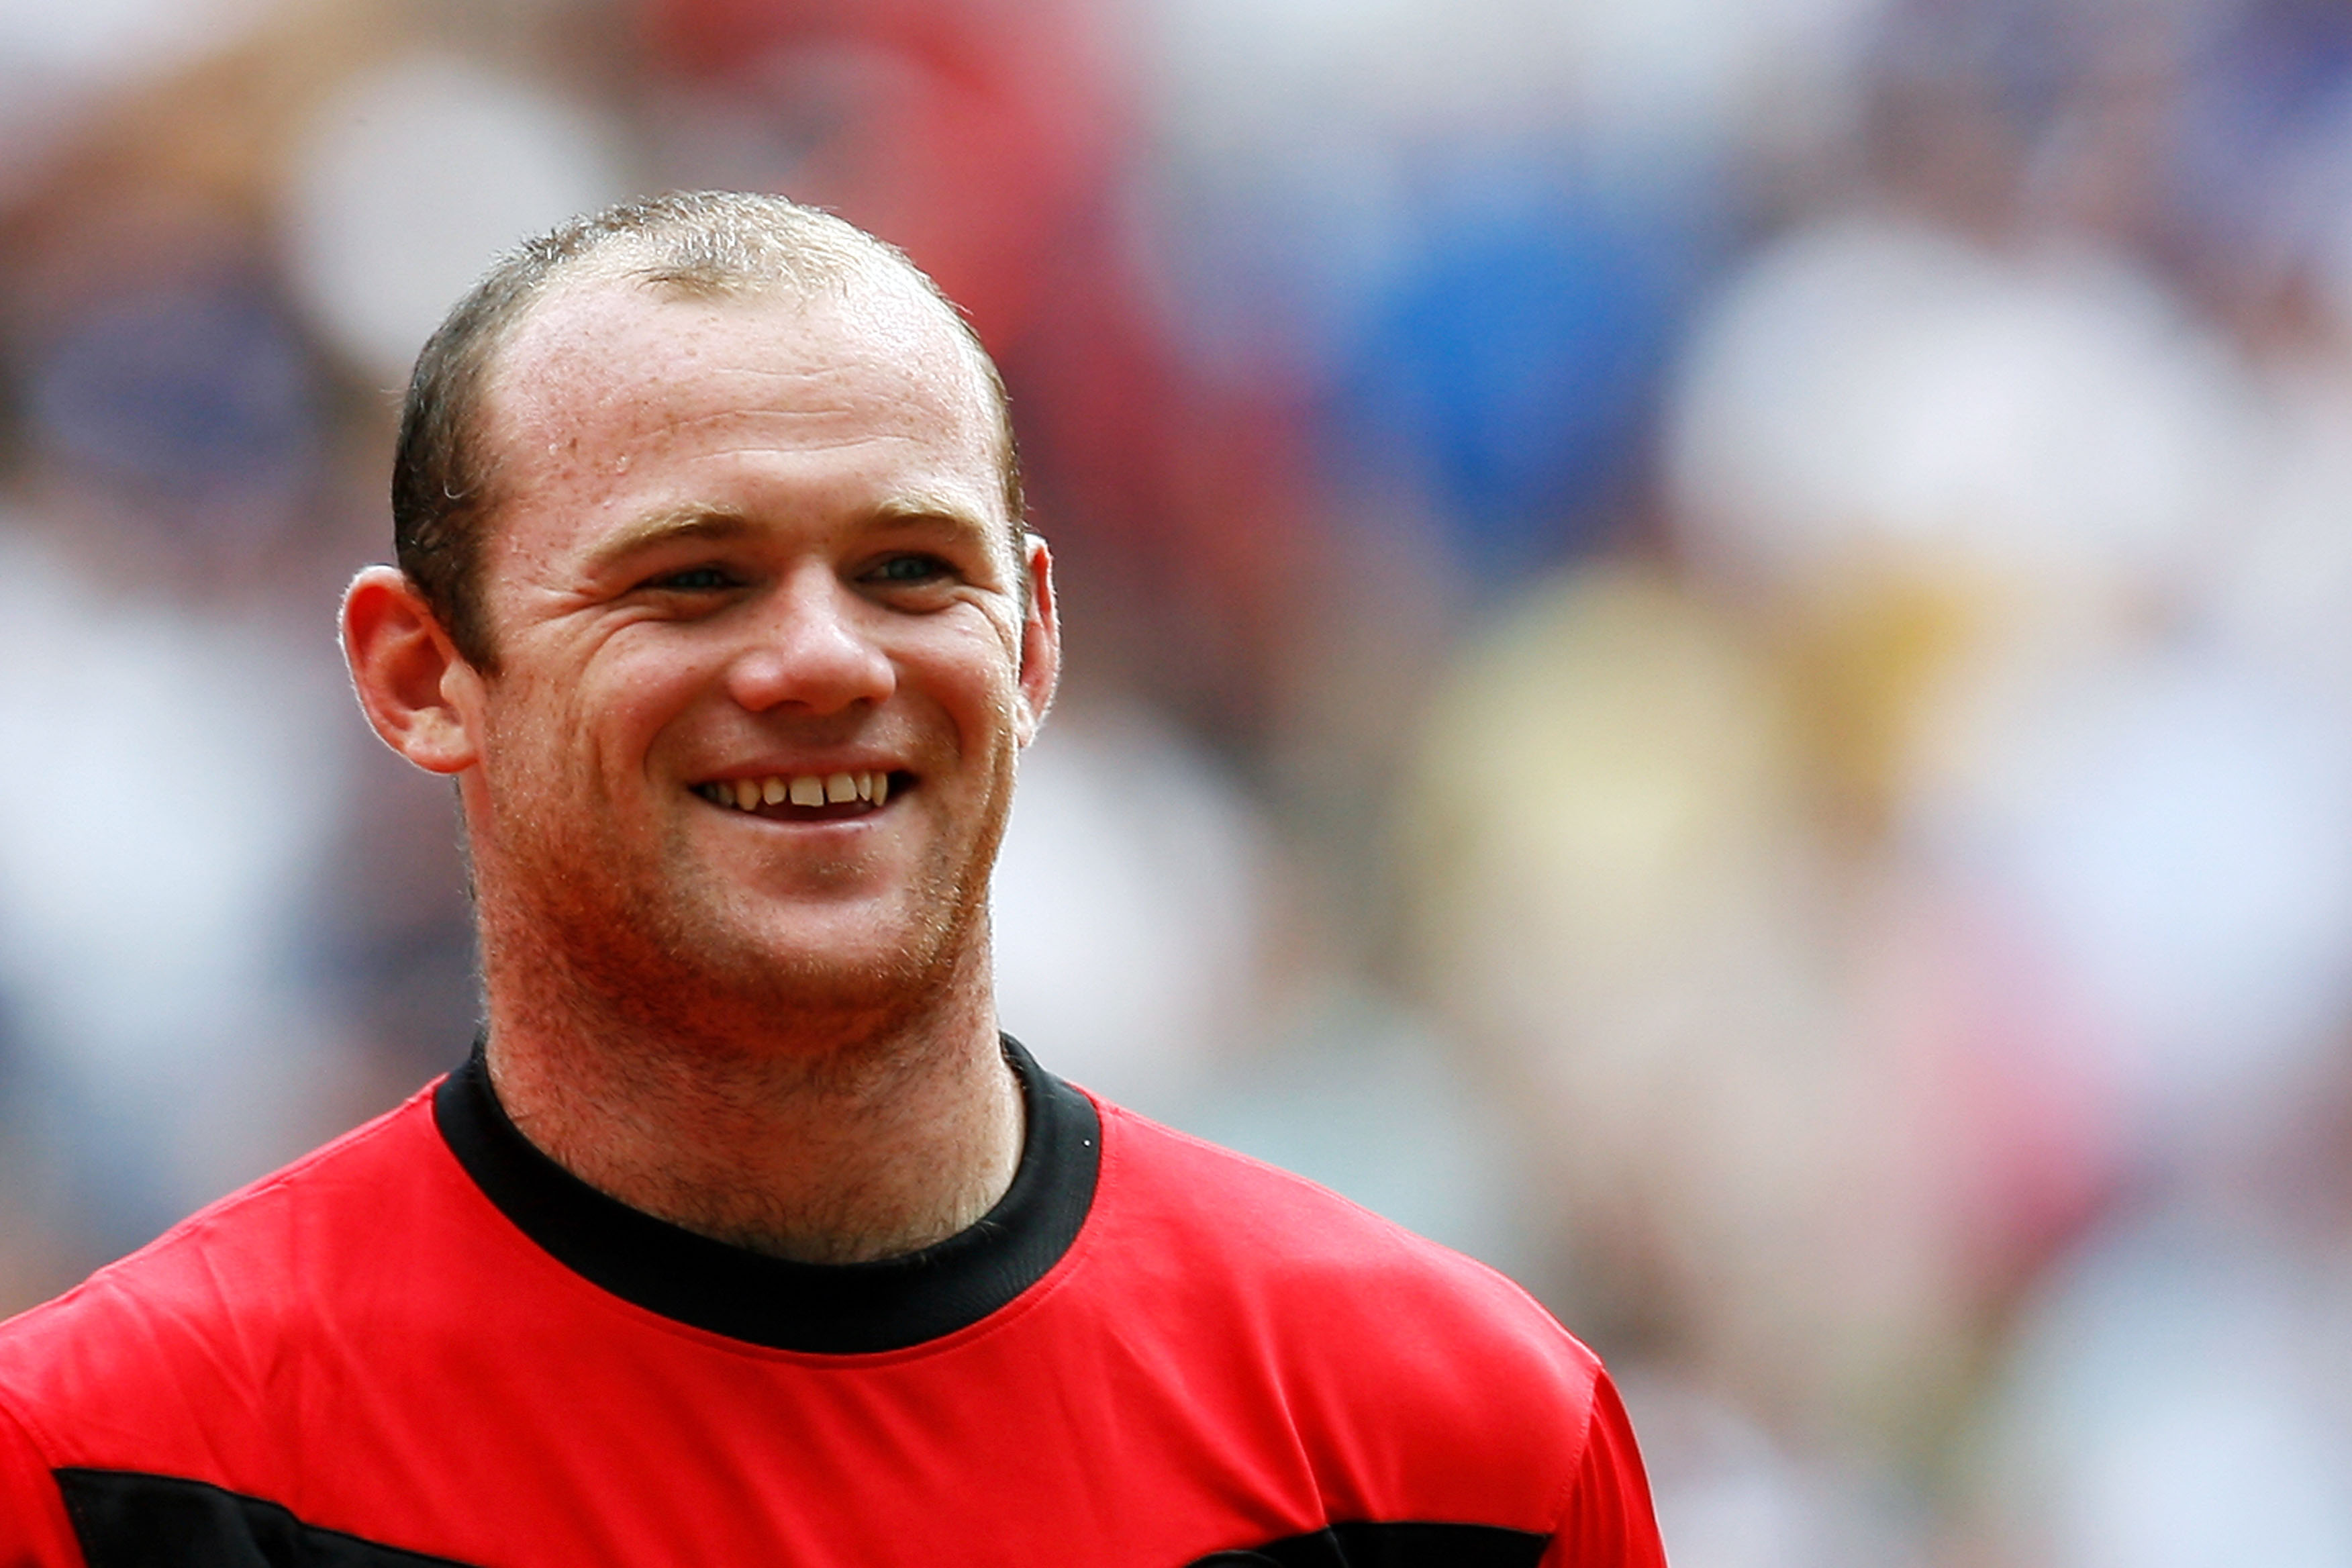 LONDON, ENGLAND - AUGUST 09:  Wayne Rooney of Manchester United smiles prior to the FA Community Shield match between Manchester United and Chelsea at Wembley Stadium on August 9, 2009 in London, England.  (Photo by Paul Gilham/Getty Images)